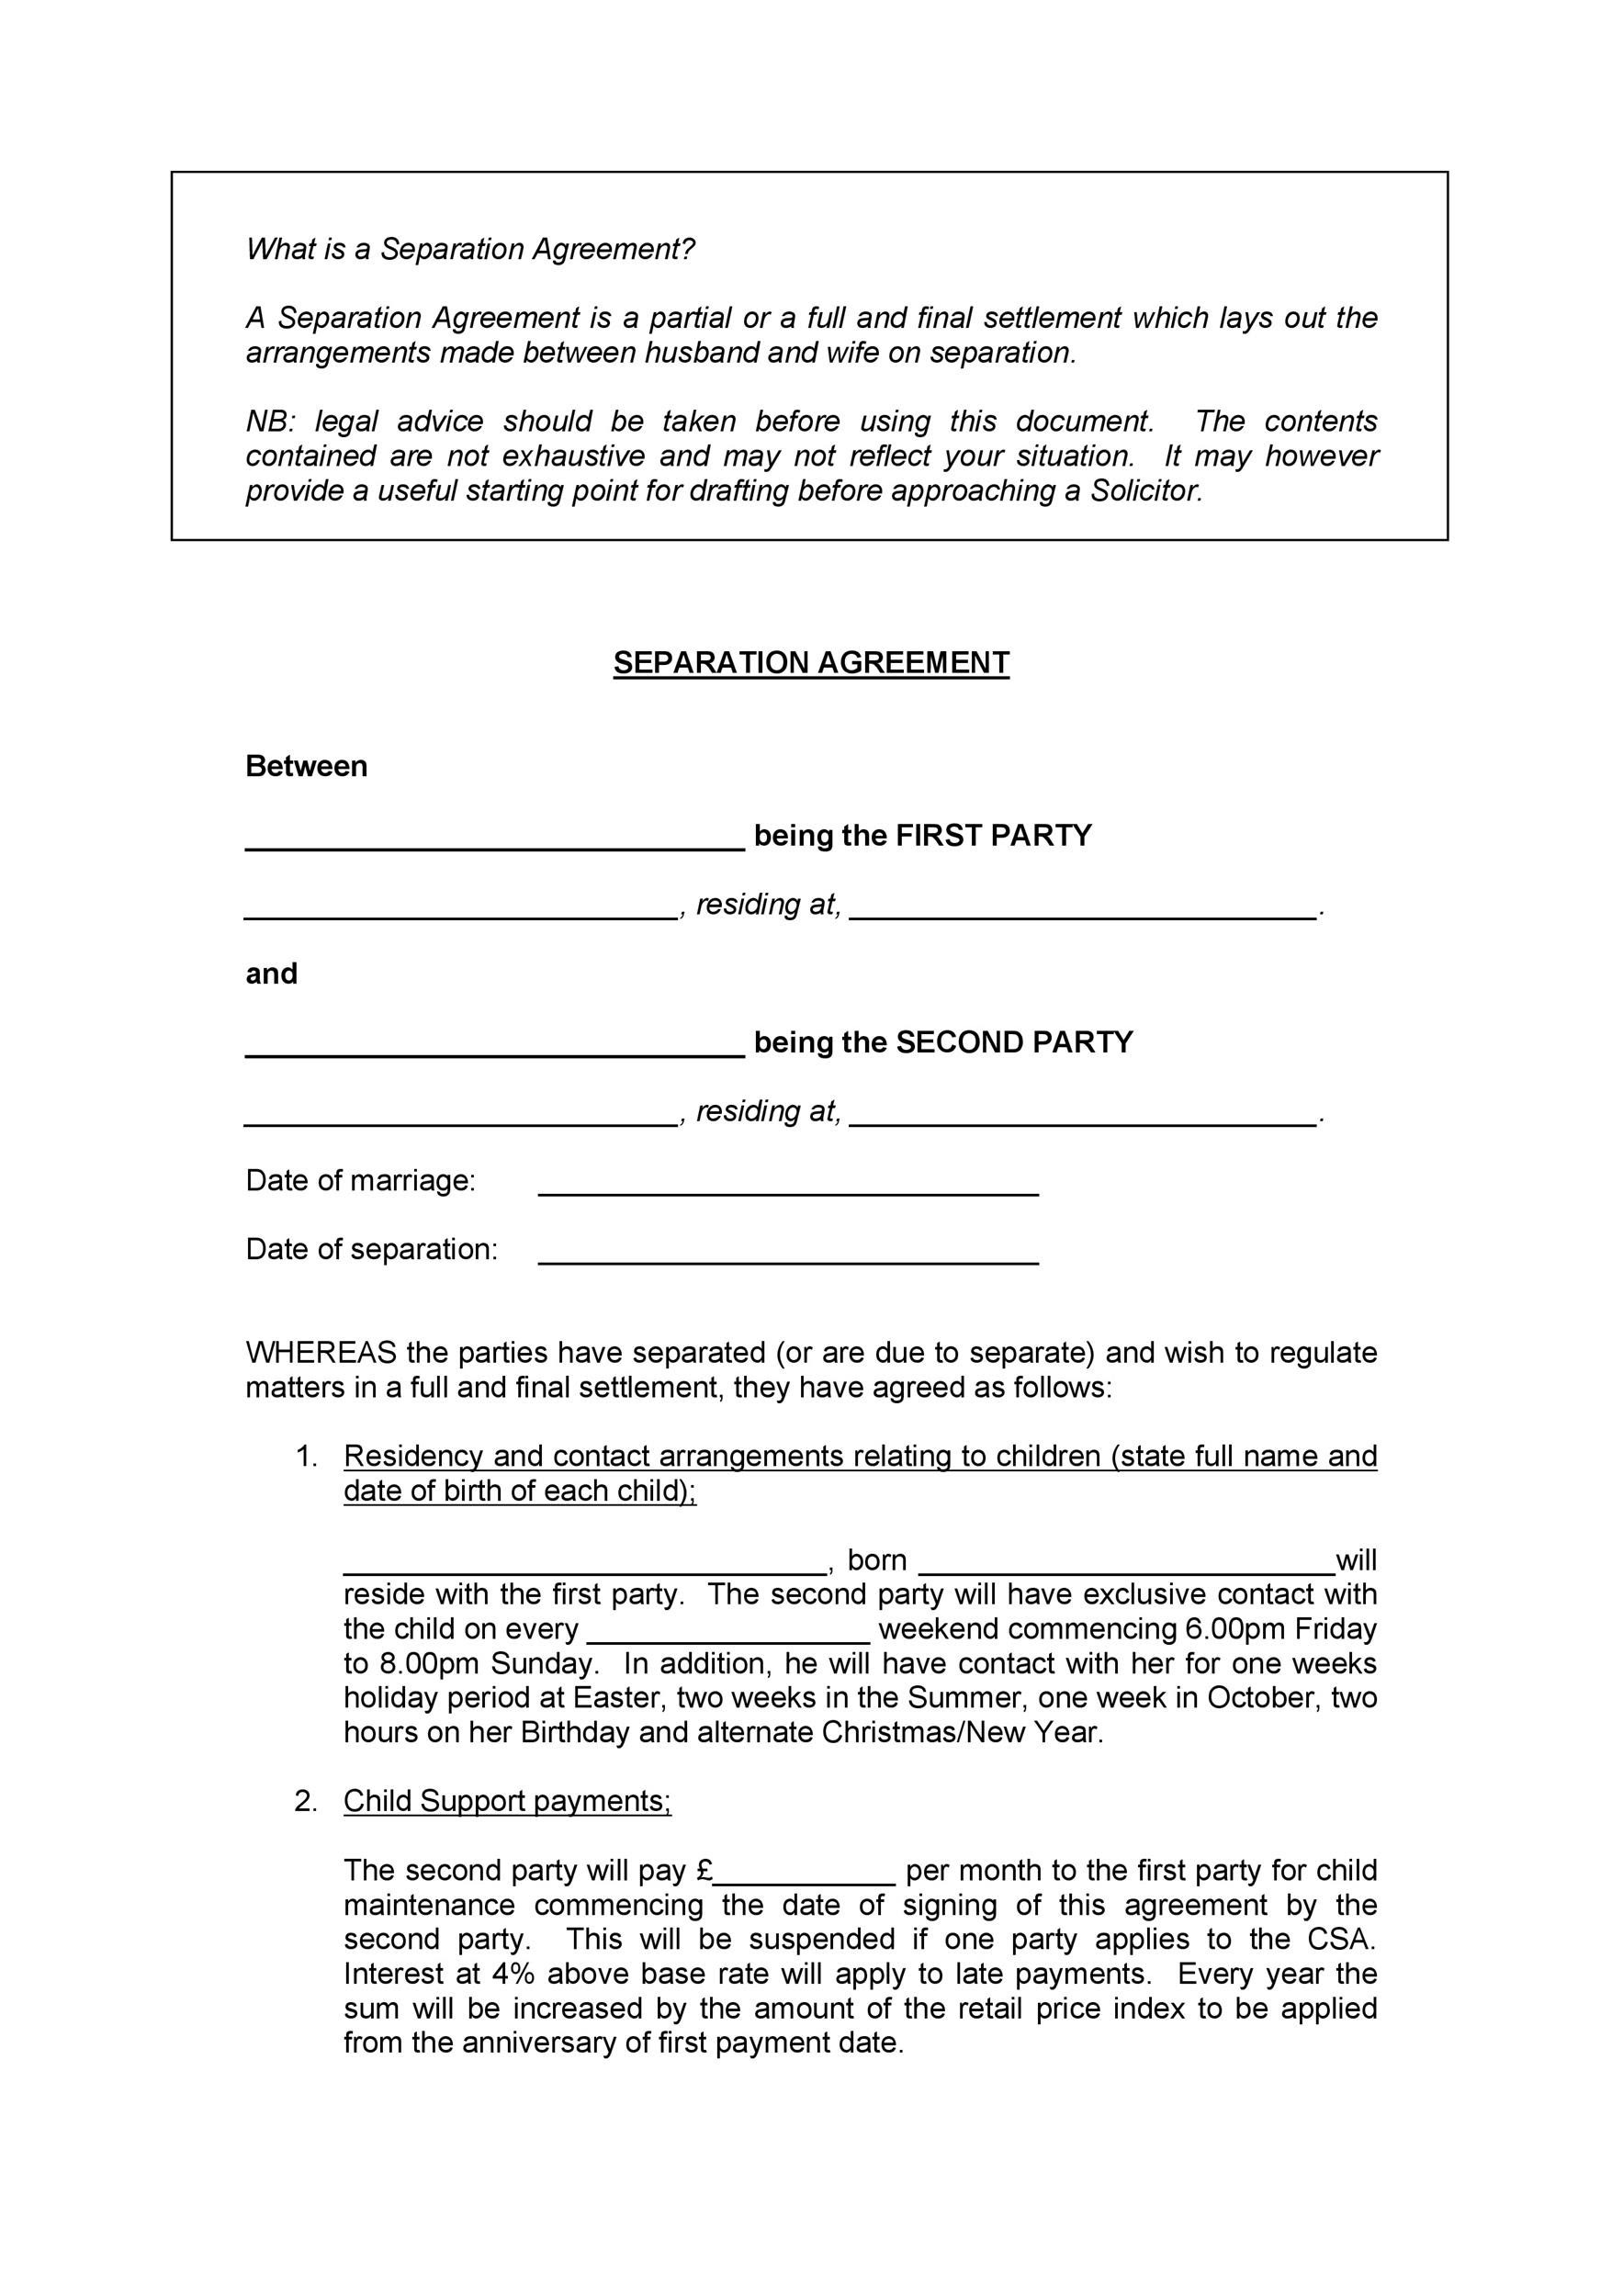 legal-separation-agreement-in-ontario-template-pdf-template